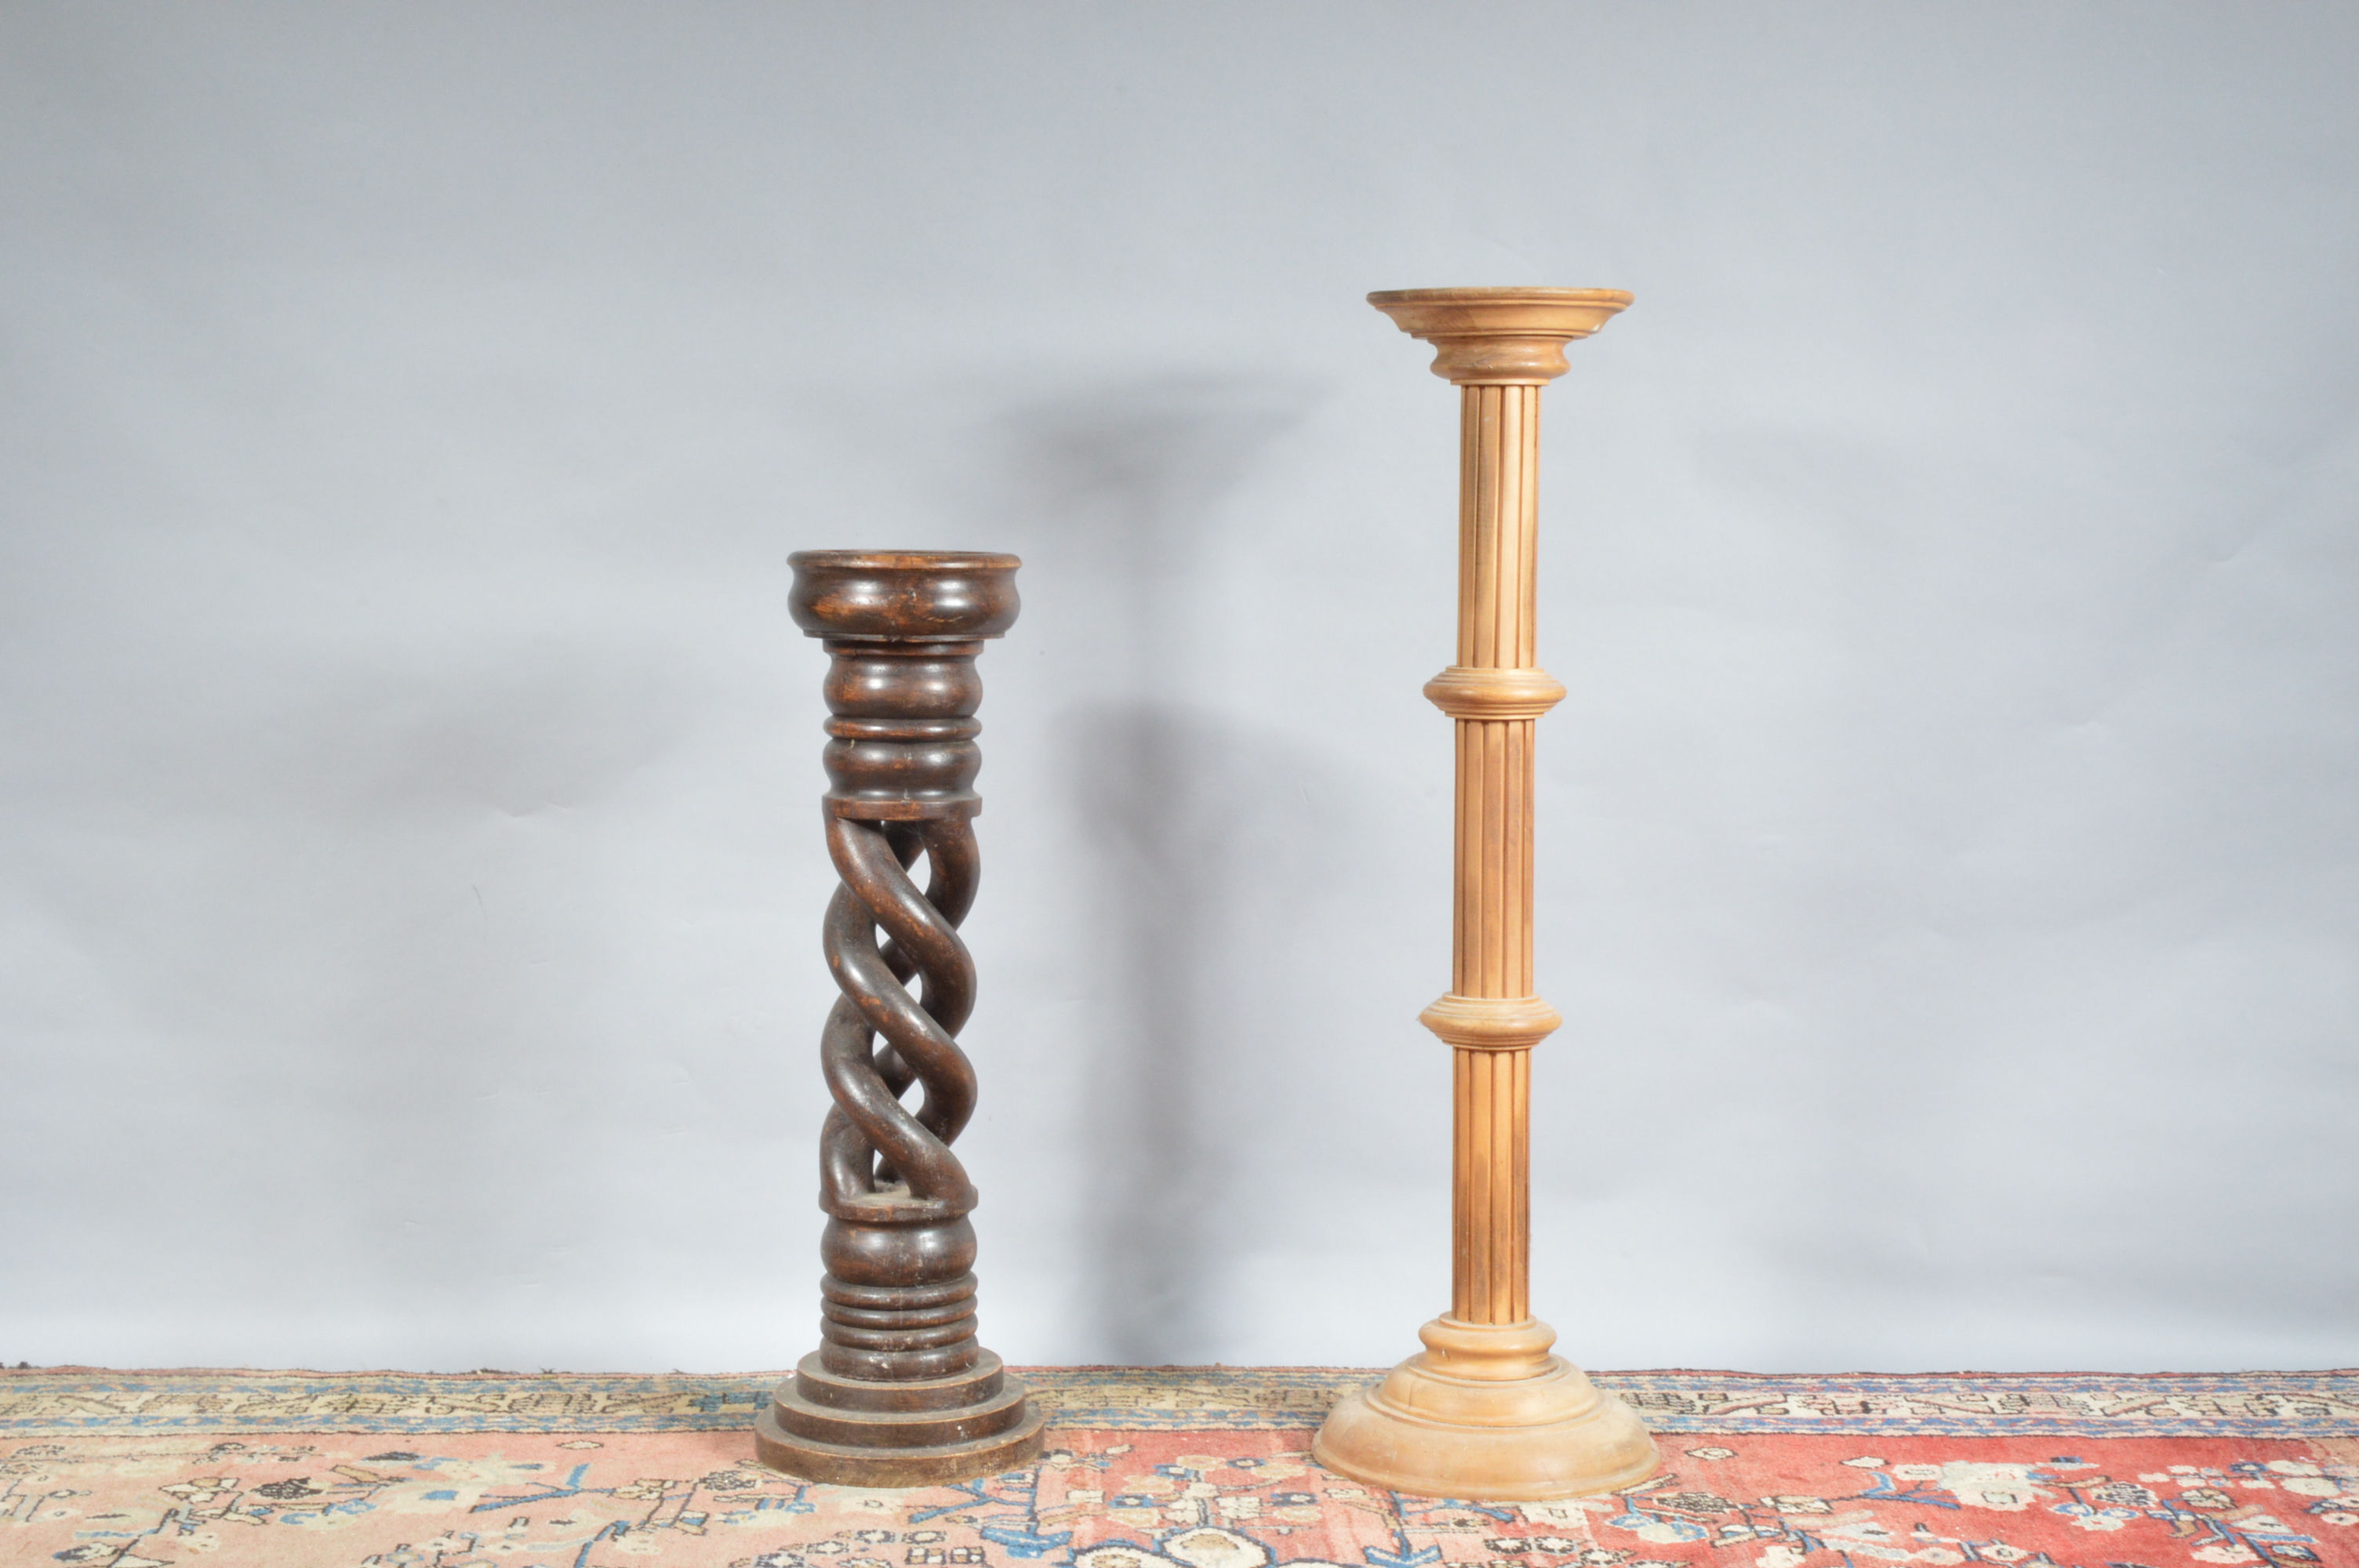 Two wooden jardinieres, one with a pierced spiral column, the other taller one lighter and with a